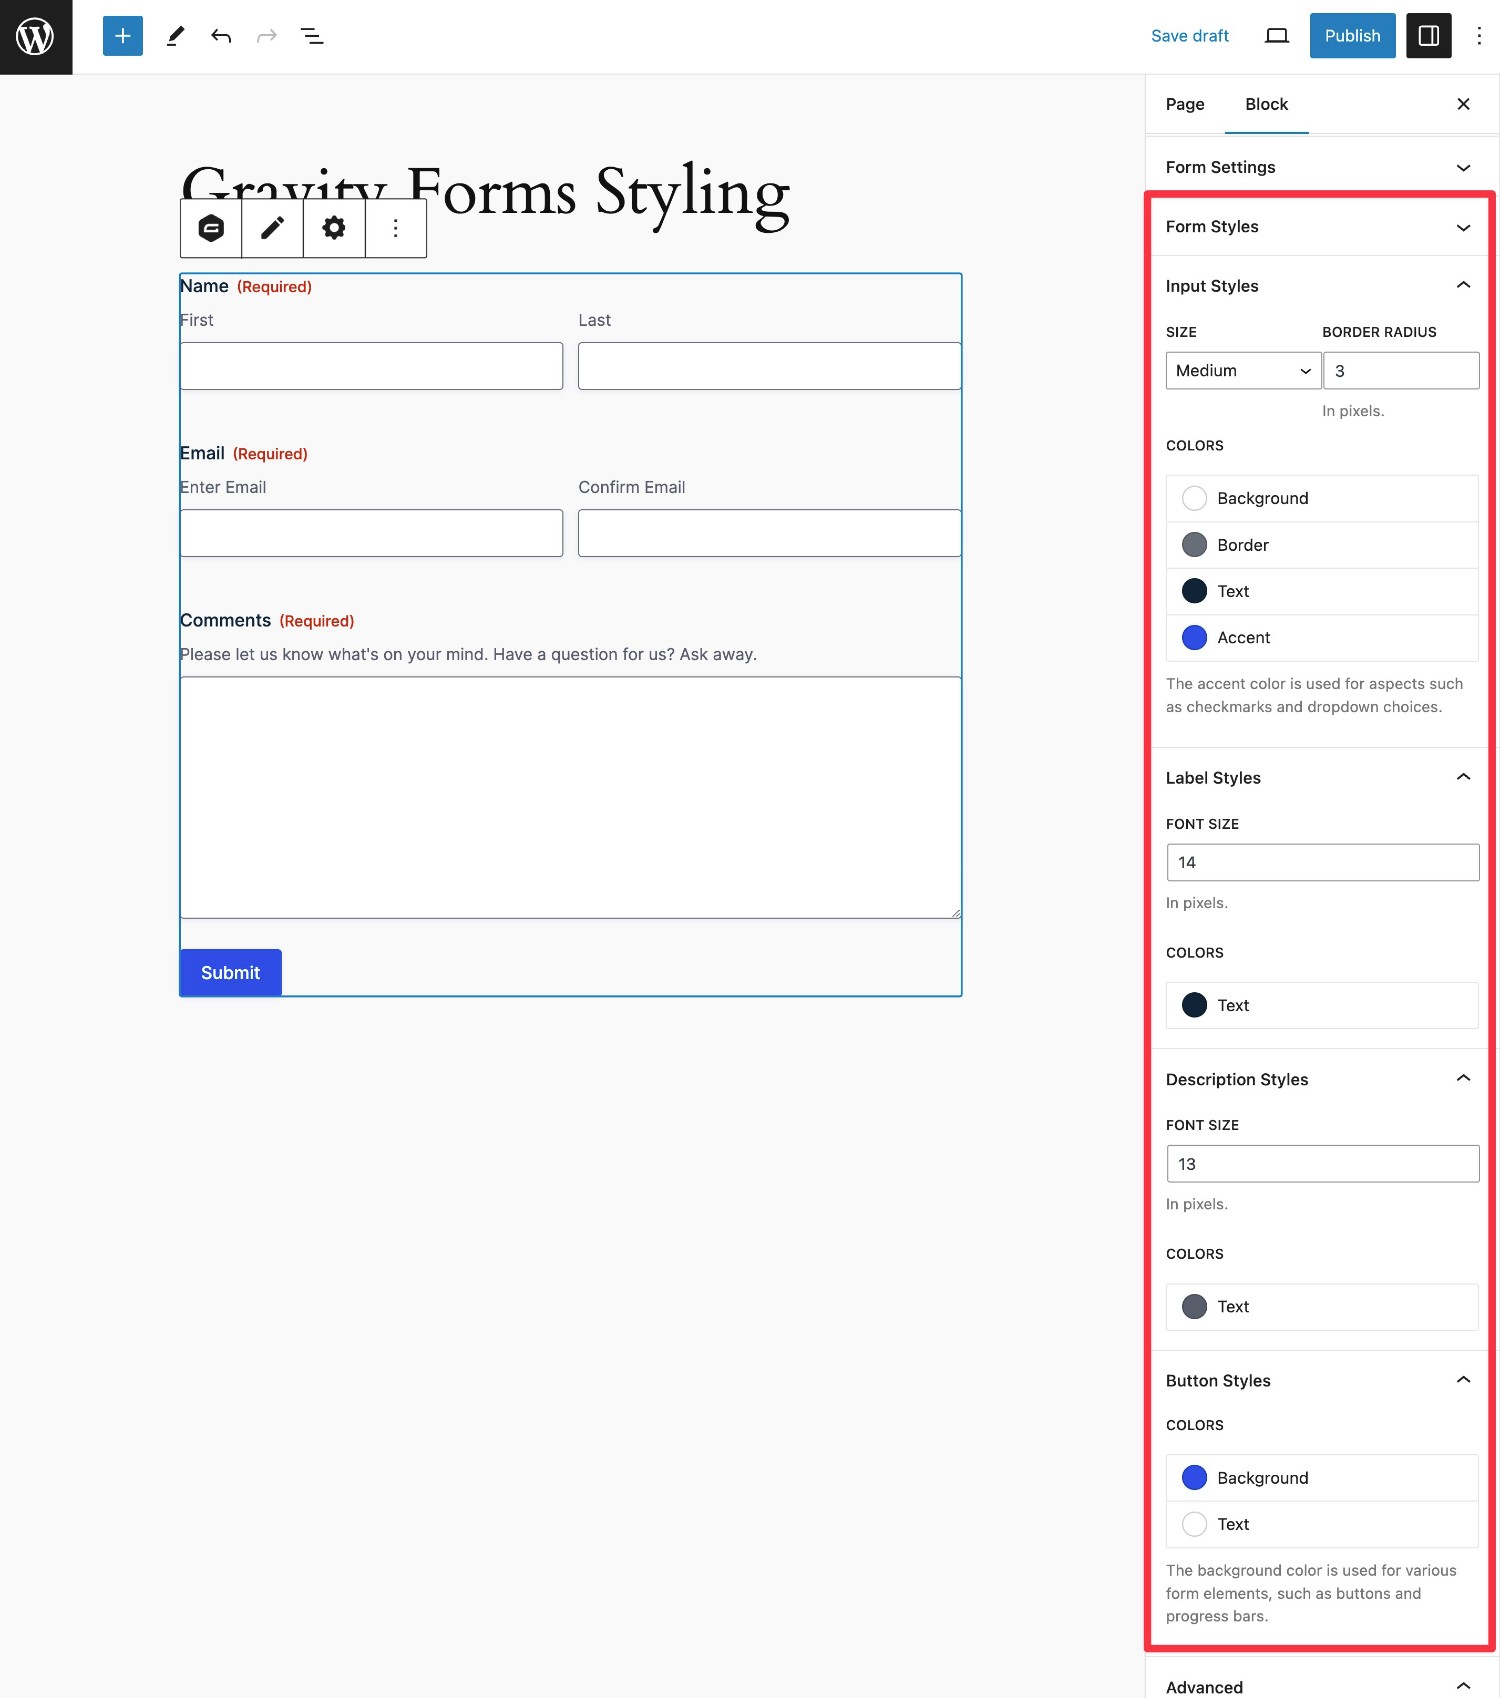 Gravity Forms style options